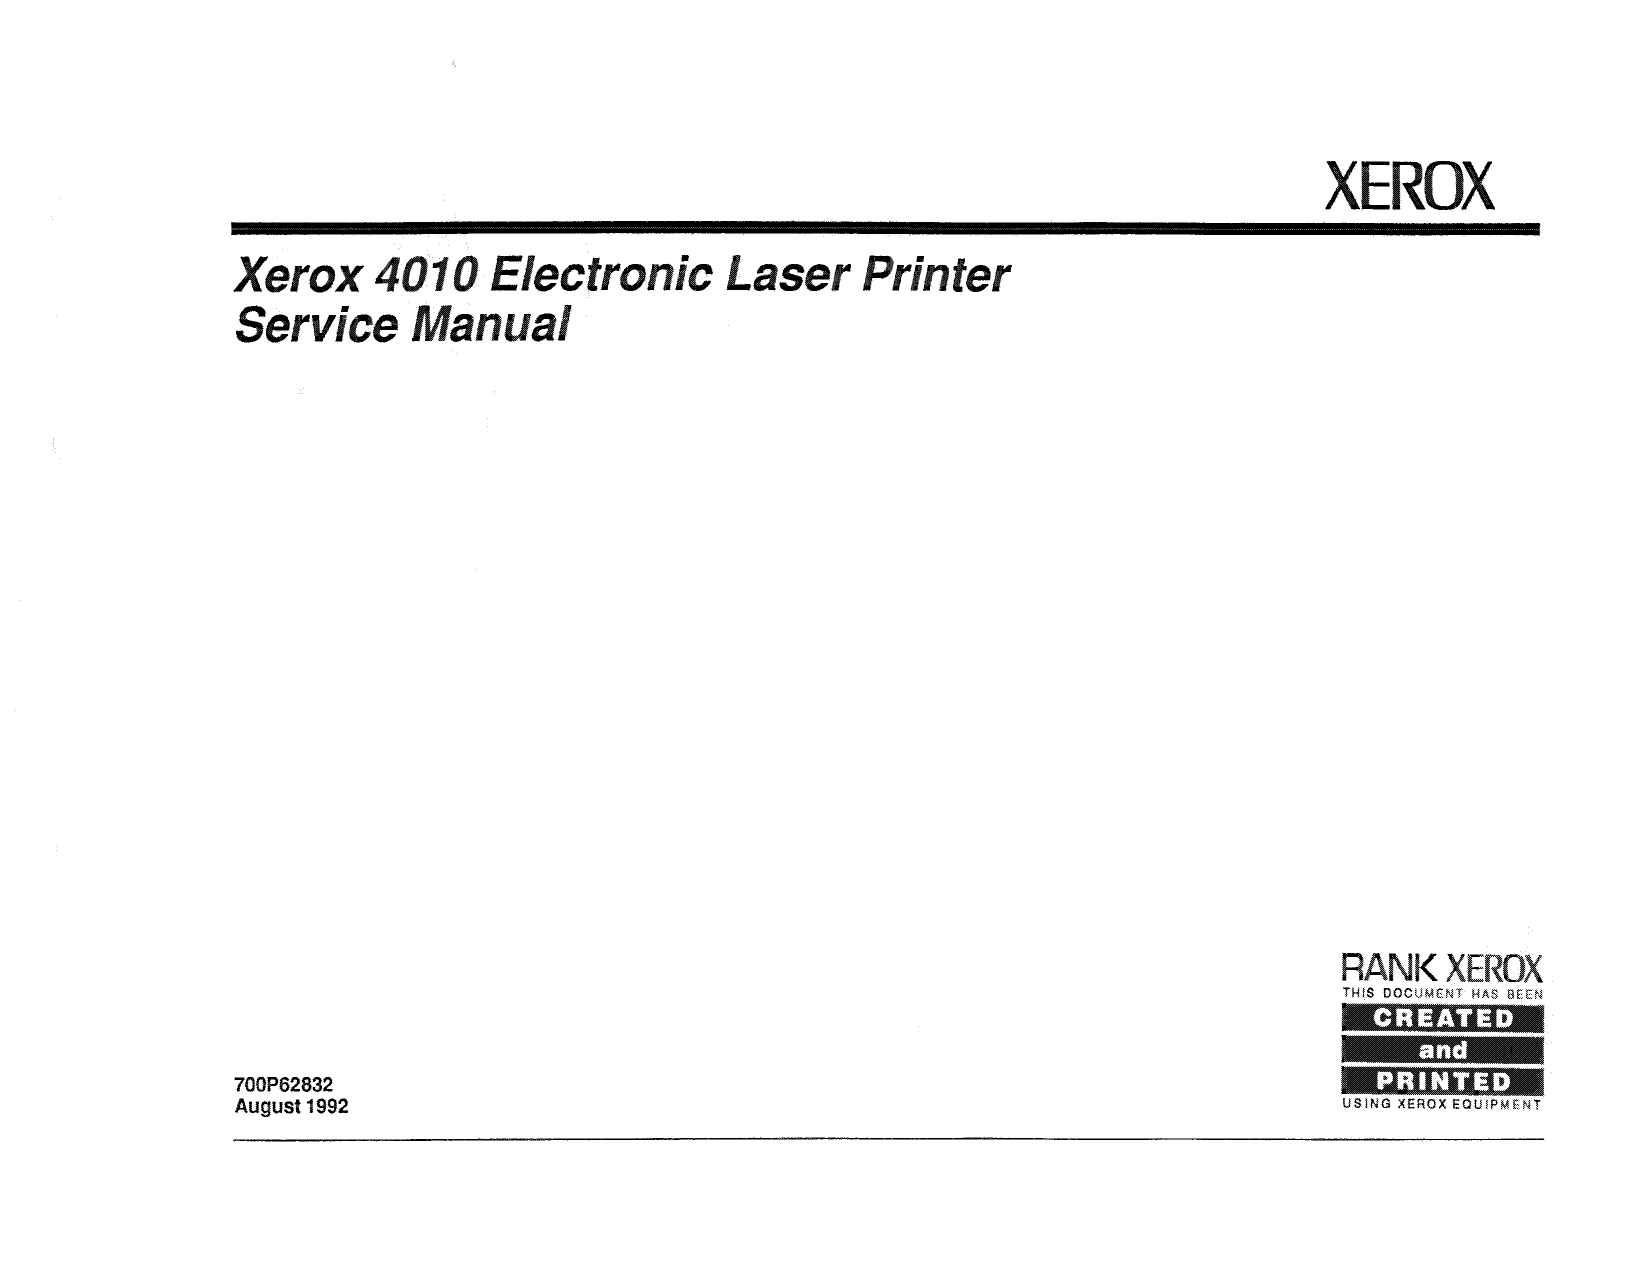 Xerox Printer 4010 Laser Parts List and Service Manual-1